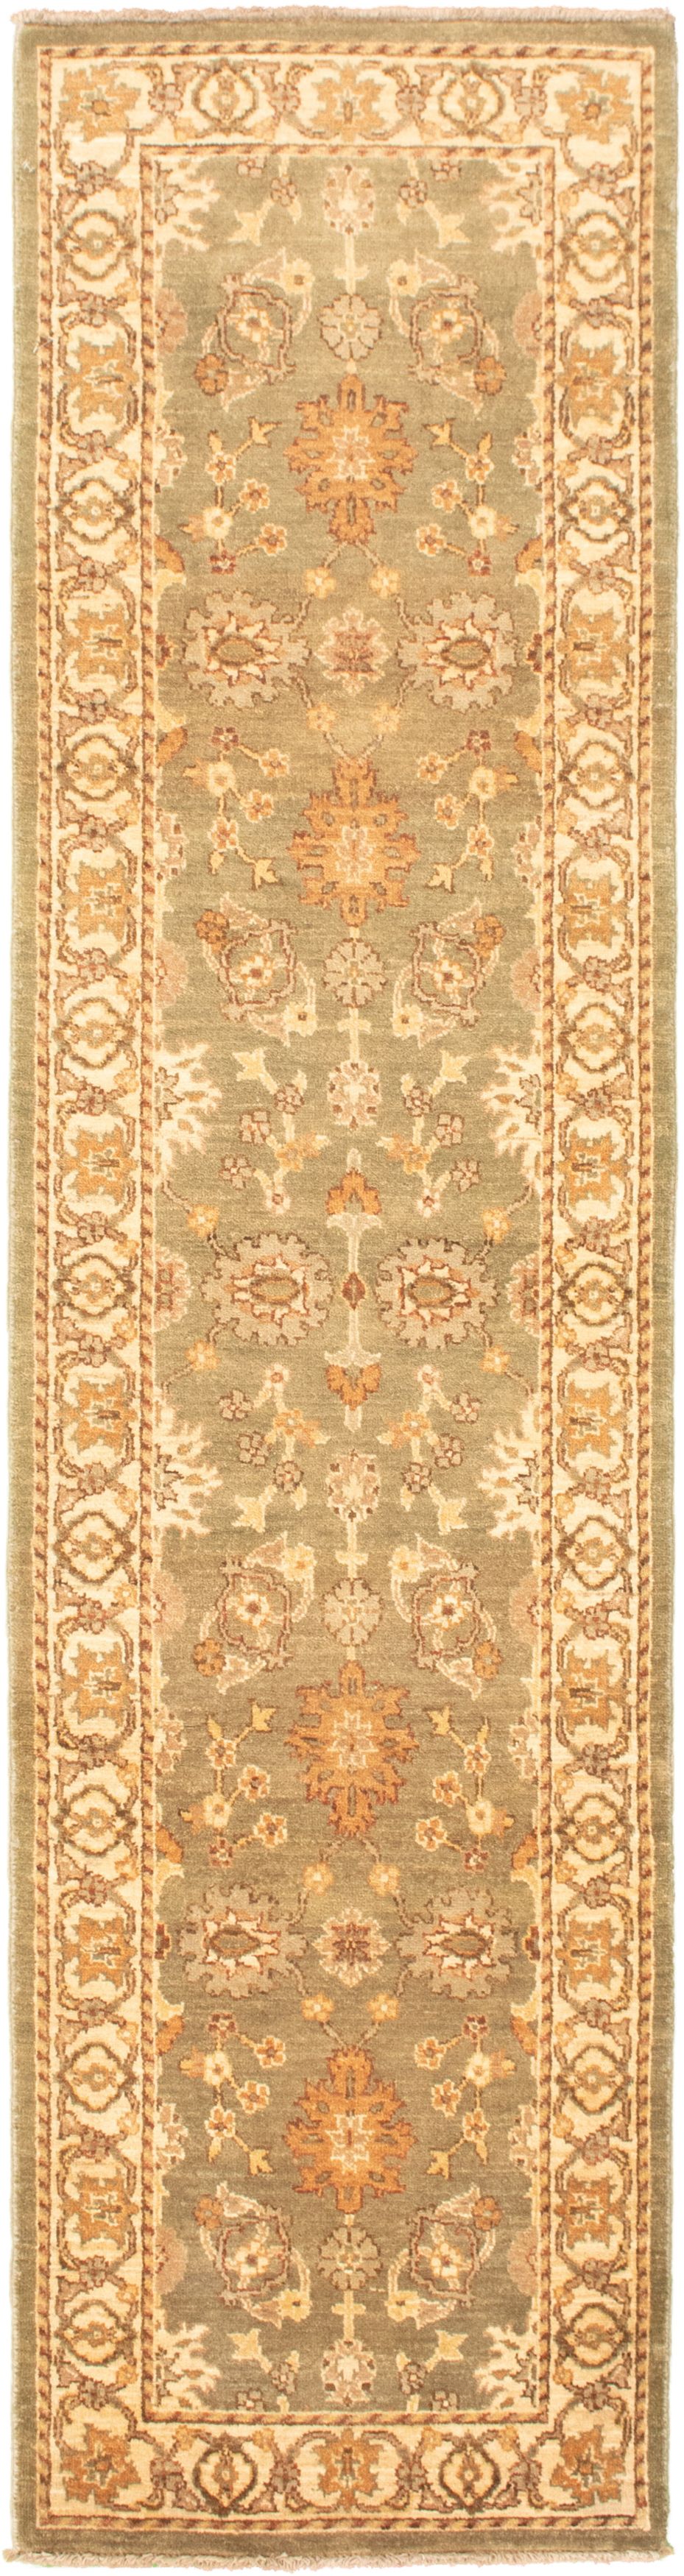 Hand-knotted Chobi Twisted Olive Wool Rug 2'6" x 10'2" Size: 2'6" x 10'2"  